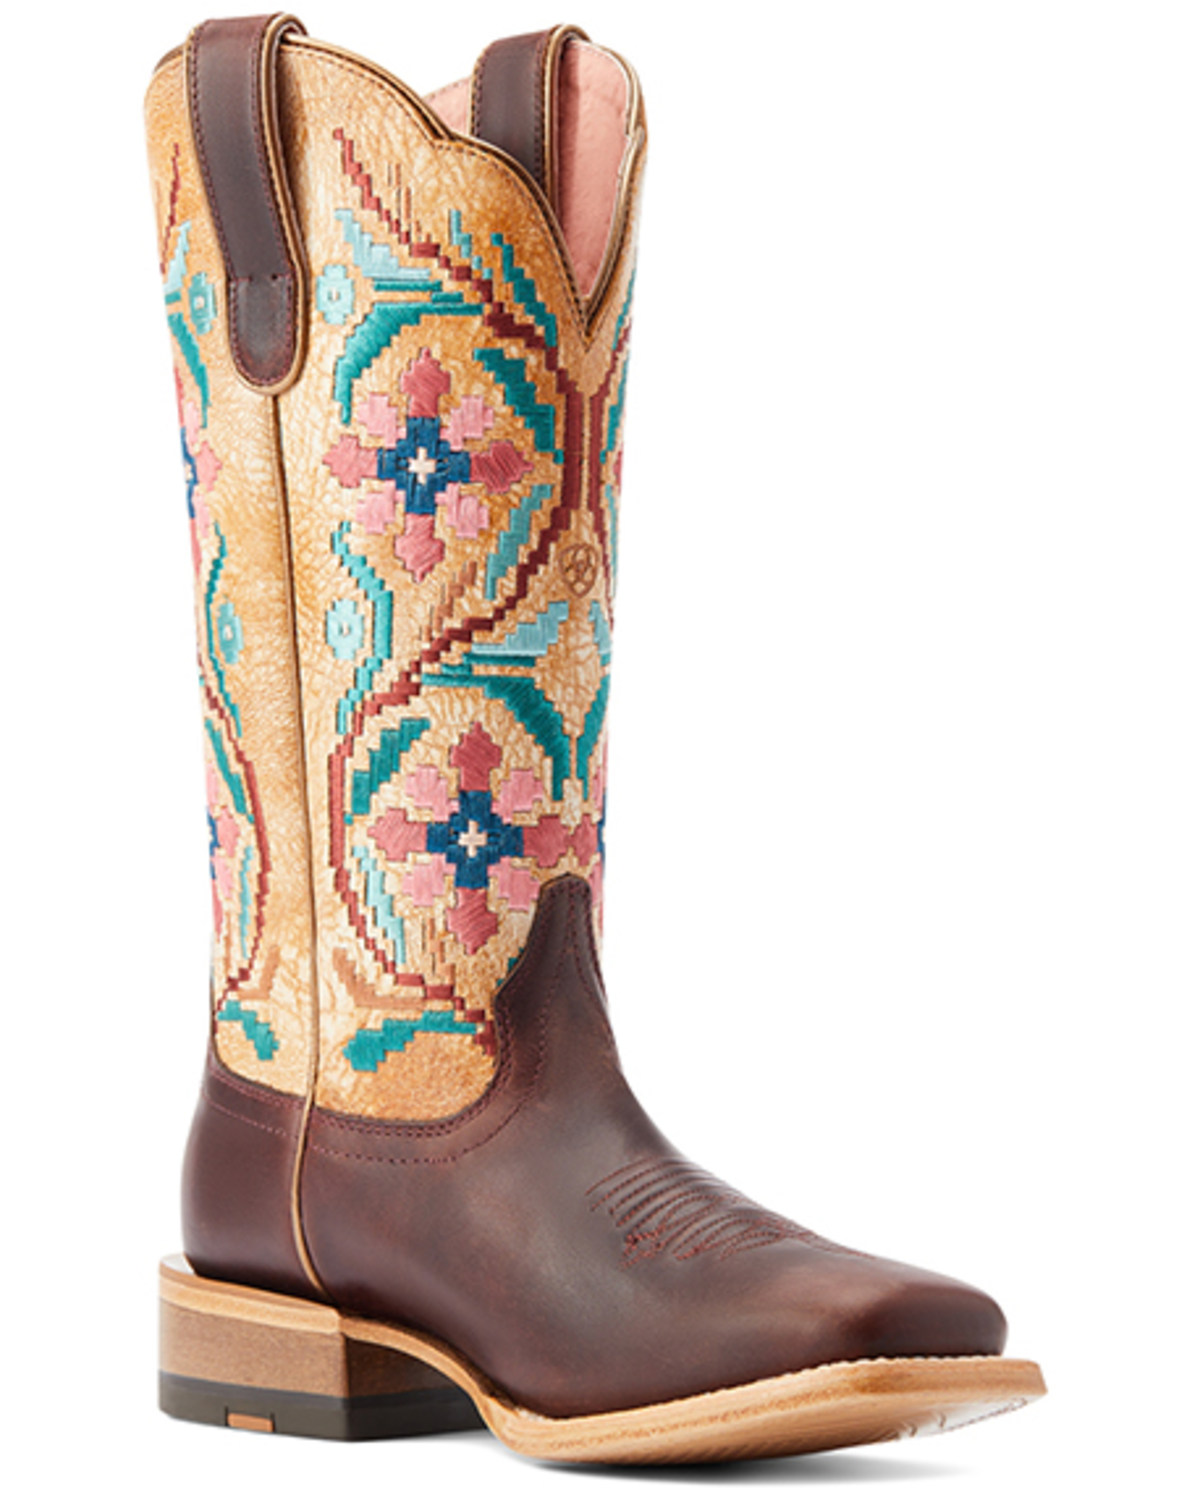 Ariat Women's Frontier Danielle Western Boots - Broad Square Toe